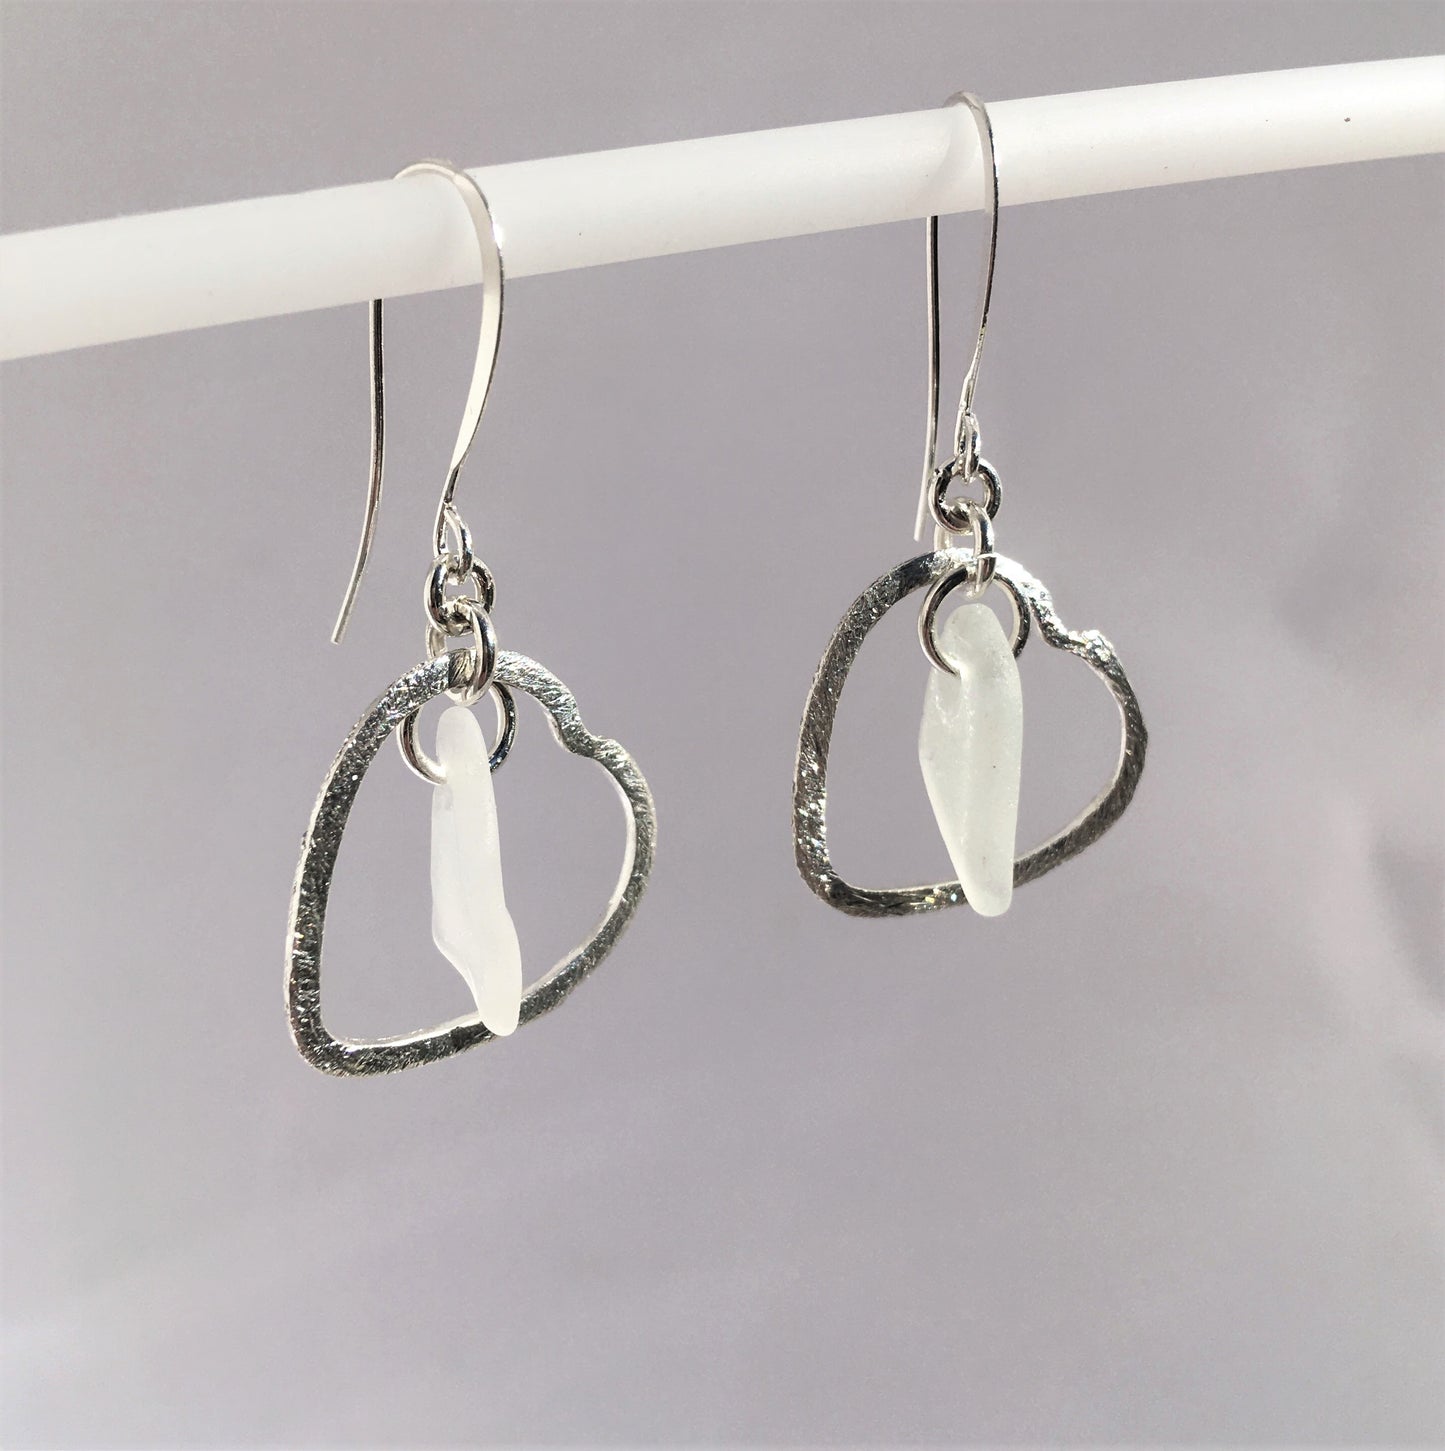 Heart Earrings - White Sea Glass from the South Shore of Nova Scotia, Canada and Sterling Silver